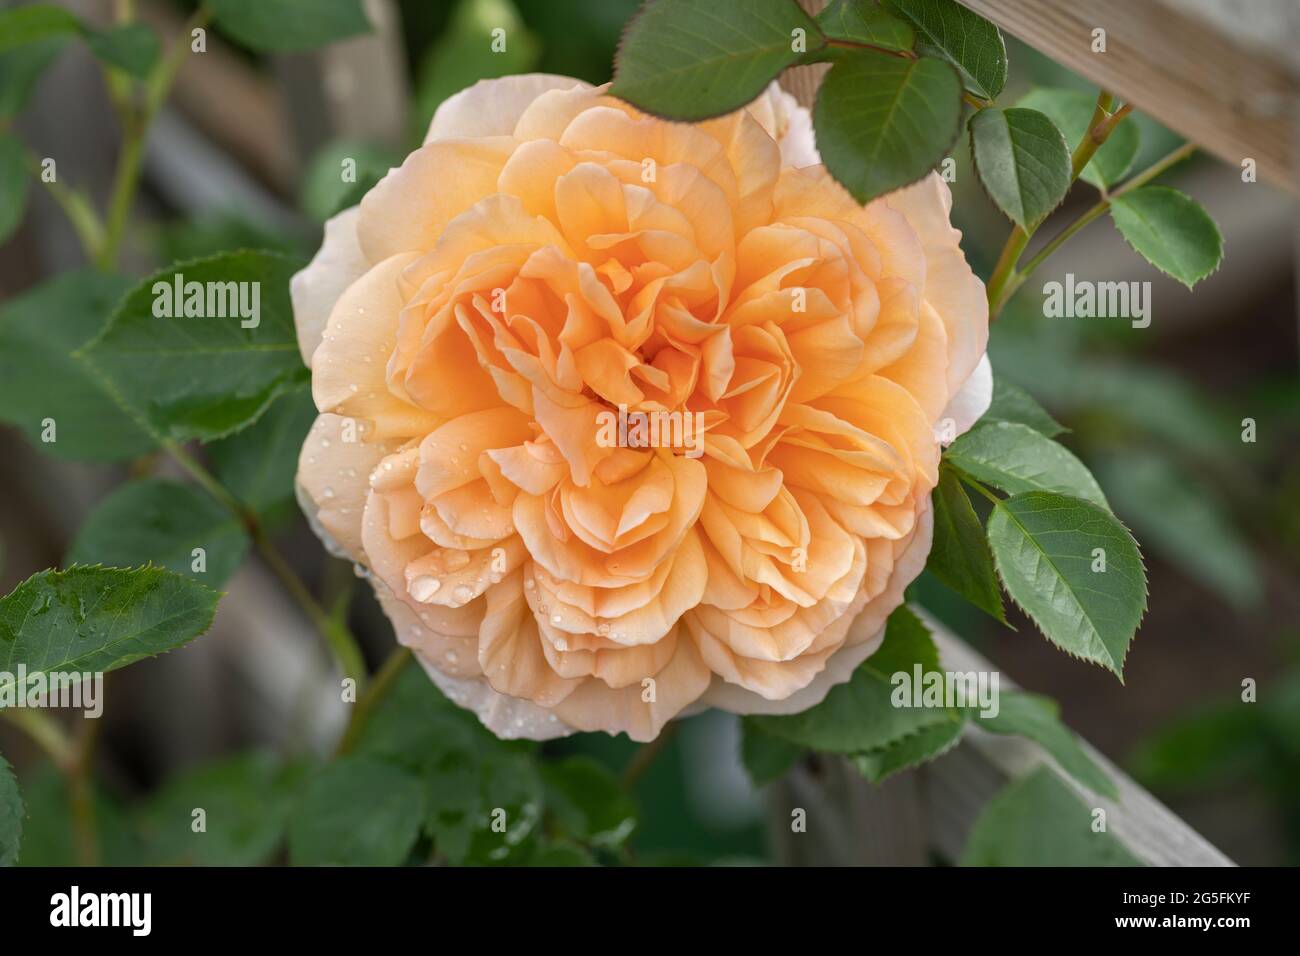 Close up of an apricot /orange rose called Rosa Dame Judi Dench flowering  in an English garden. A beautiful David Austin rose bloom with dew. UK  Stock Photo - Alamy